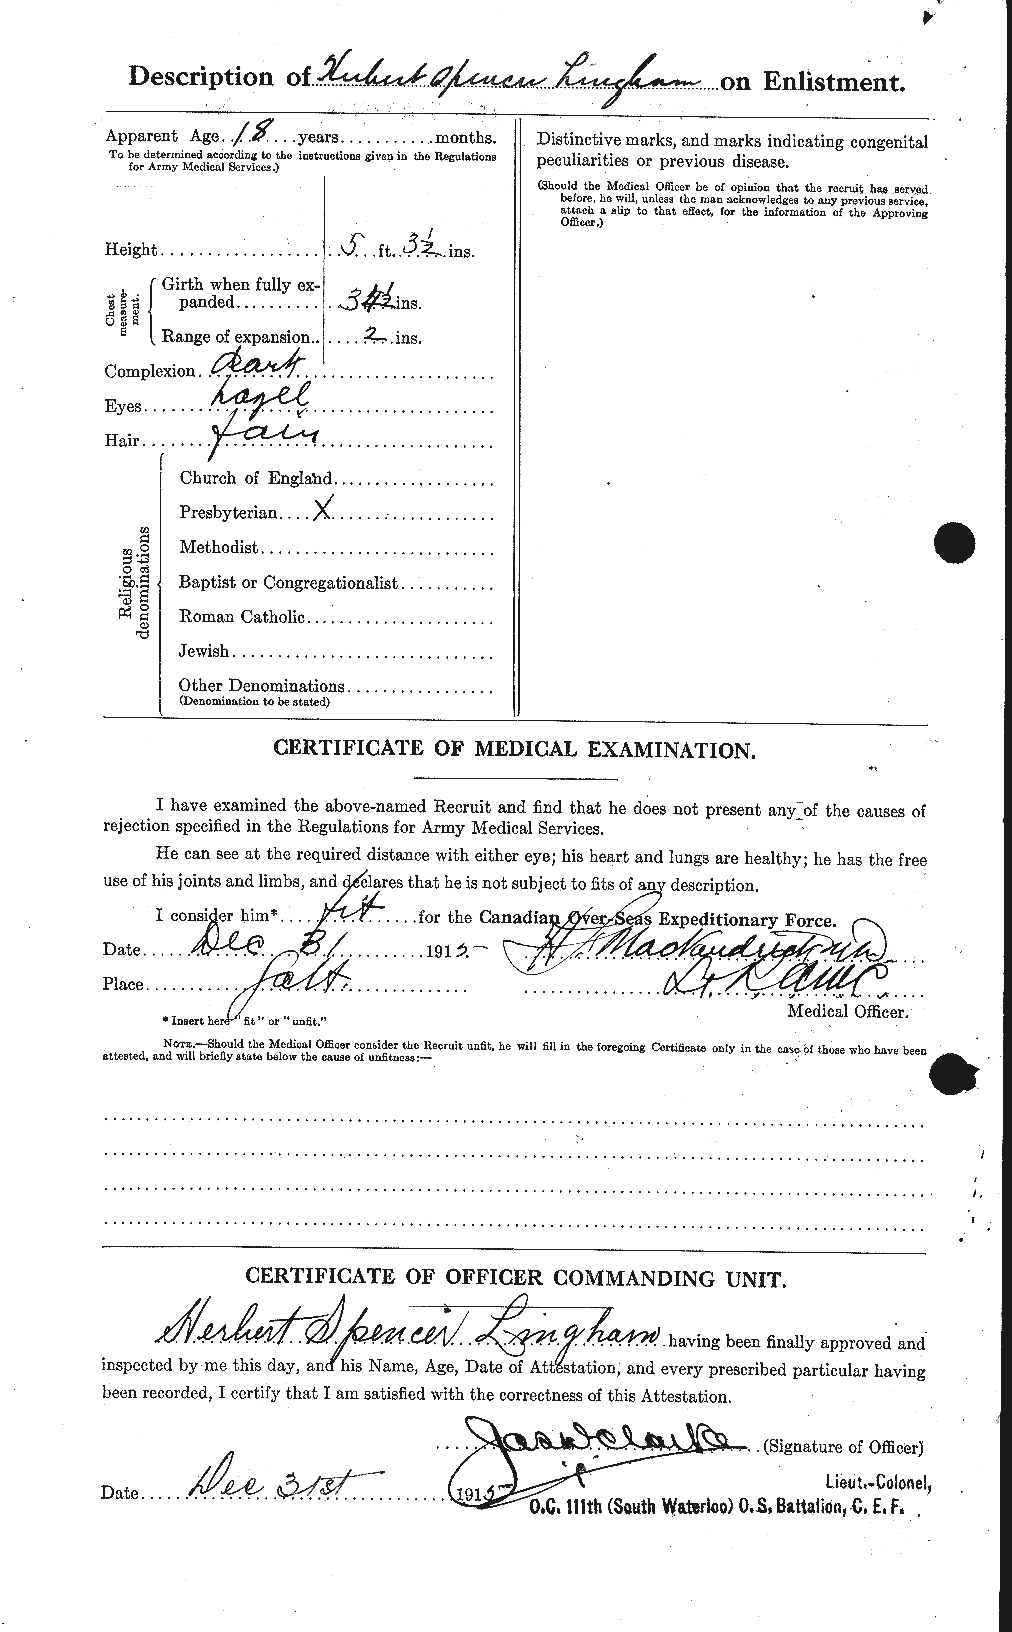 Personnel Records of the First World War - CEF 467974b